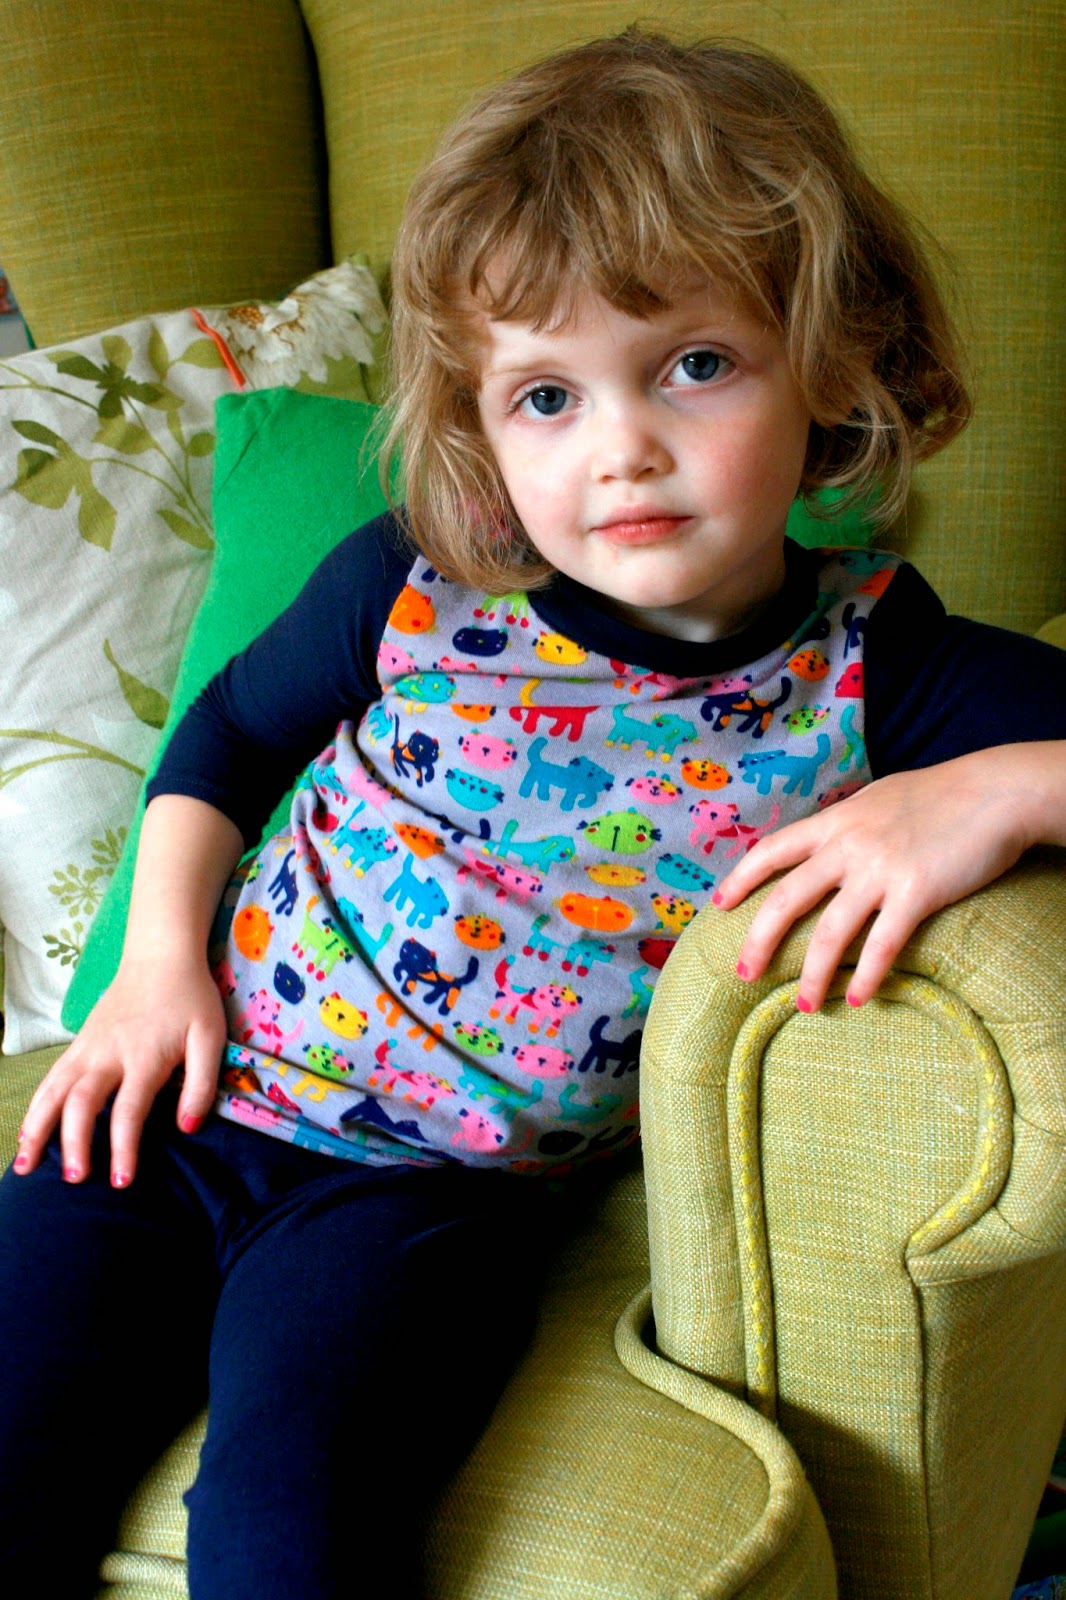 http://losingmythread.blogspot.co.uk/2014/09/all-you-need-jammies-from-heidi-and-finn.html